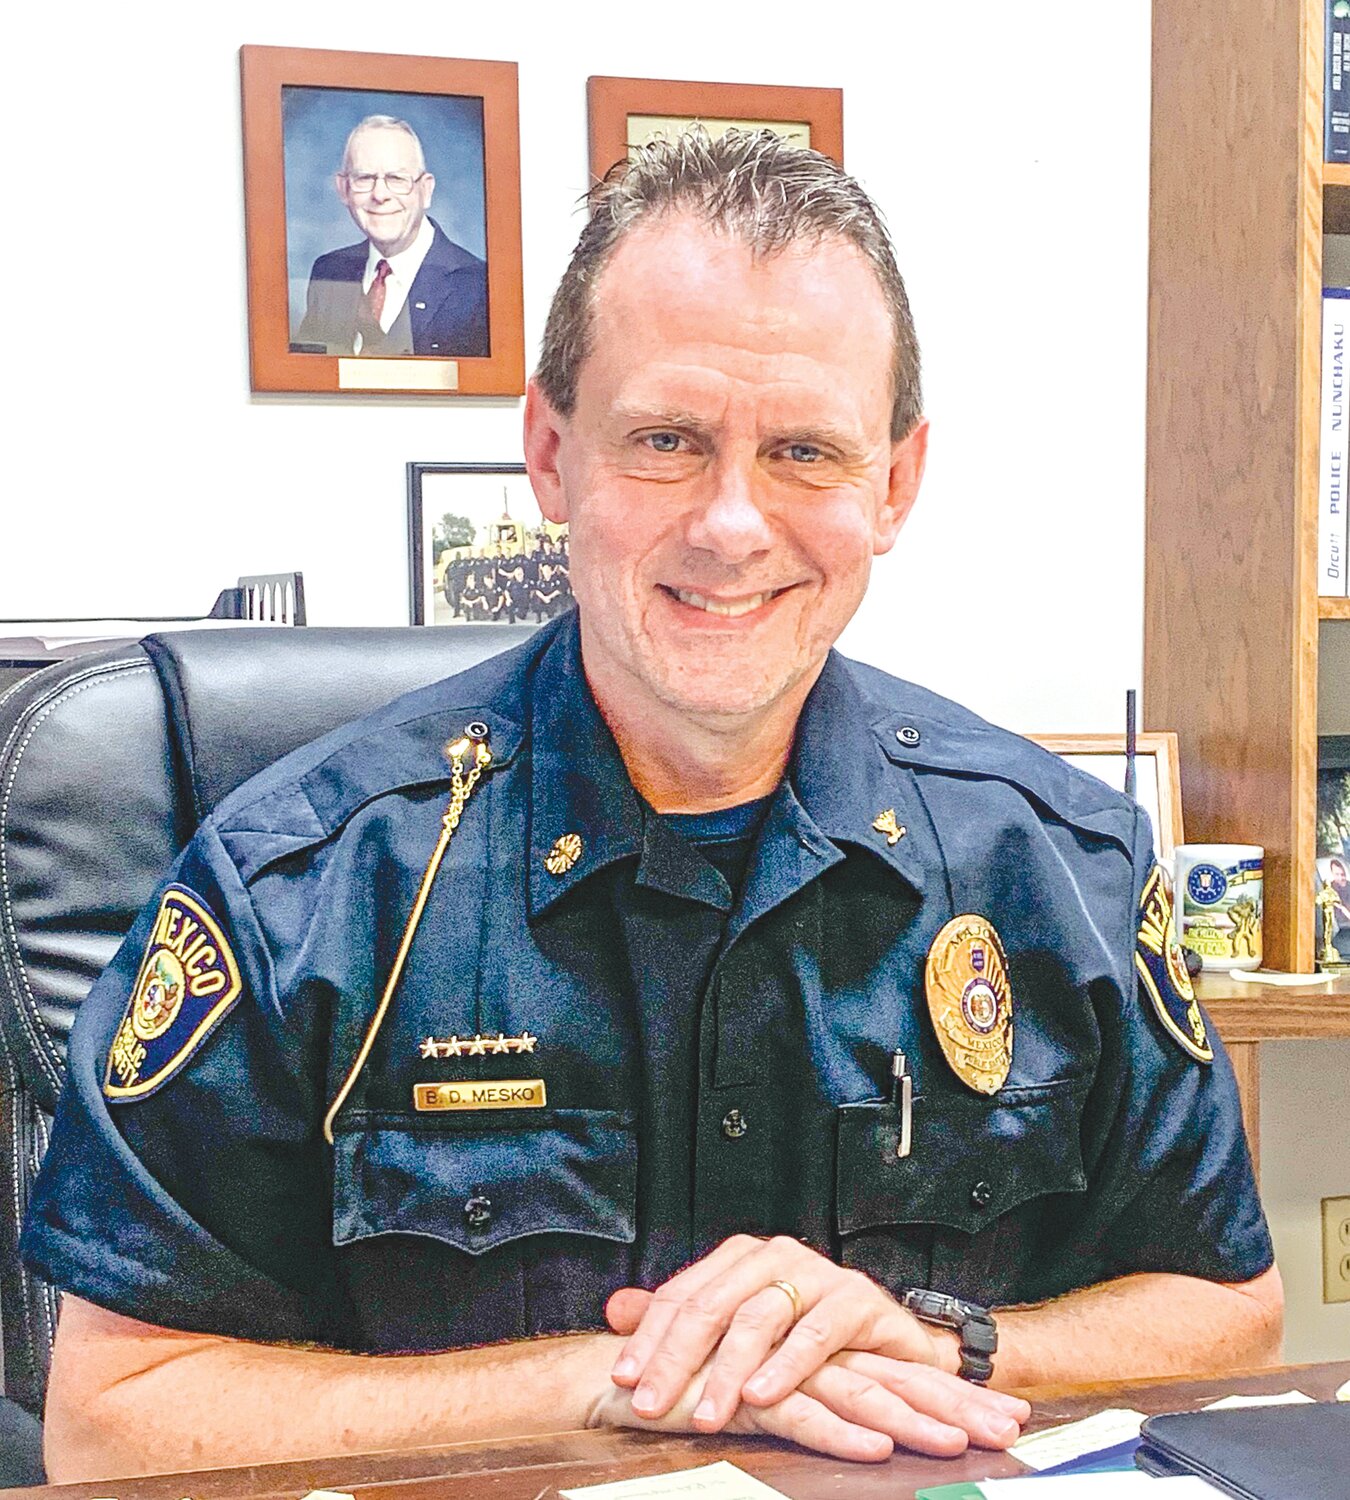 New Mexico Public Safety Chief Brice Mesko began his new job this week taking over for former Chief Susan Rockett.